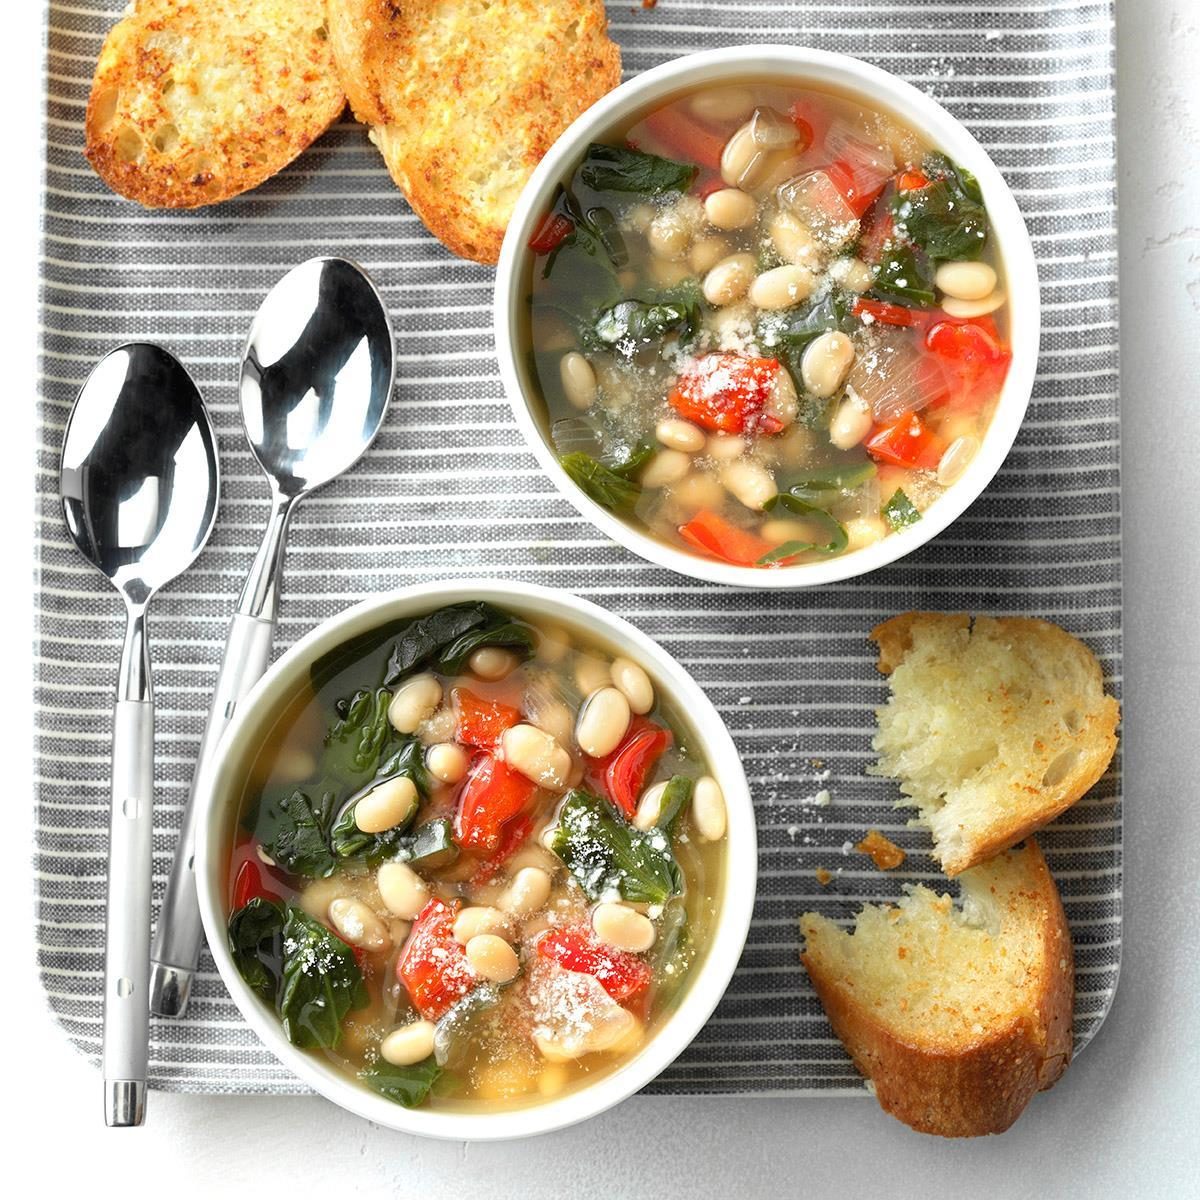 Day 19: Slow-Cooker Spinach Bean Soup